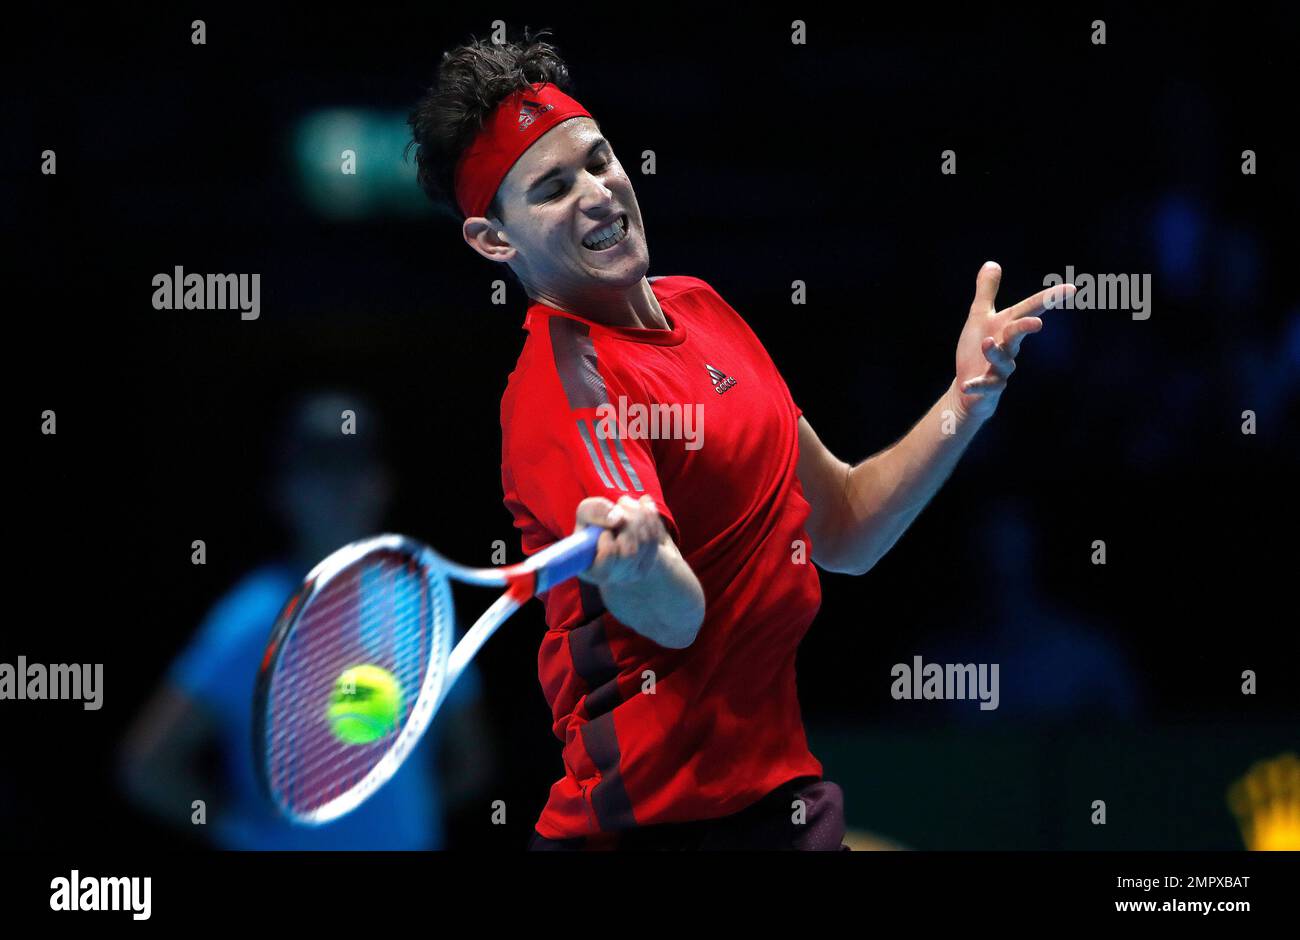 Dominic Thiem of Austria returns to Pablo Carreno Busta of Spain during their singles tennis match at the ATP World Finals at the O2 Arena in London, Wednesday, Nov